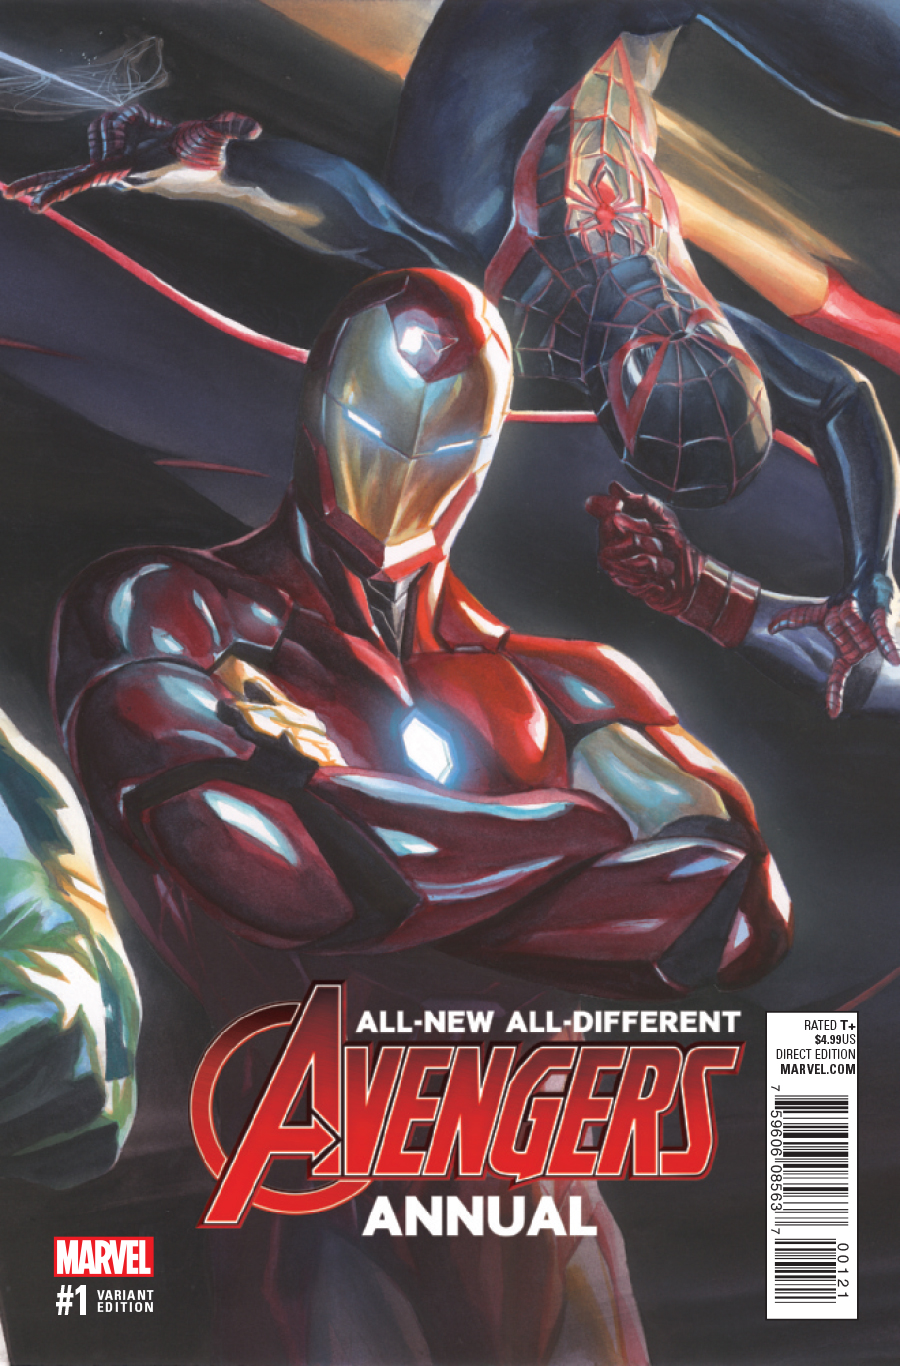 All-New All-Different Avengers Annual #1